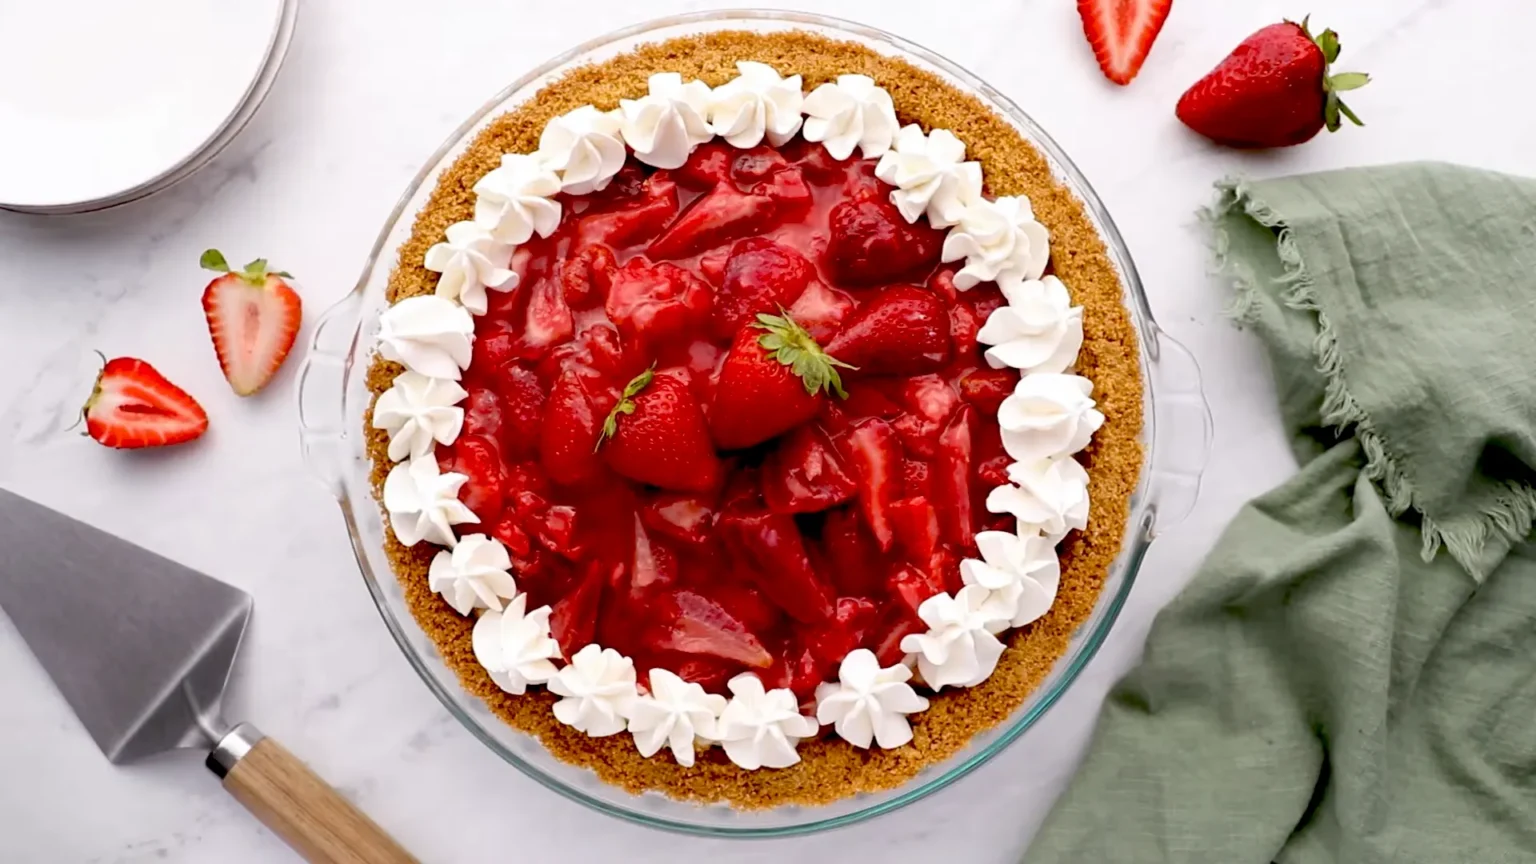 Discover how to make the perfect Strawberry Cream Cheese Pie with our easy-to-follow recipe and expert tips. Ideal for any occasion!